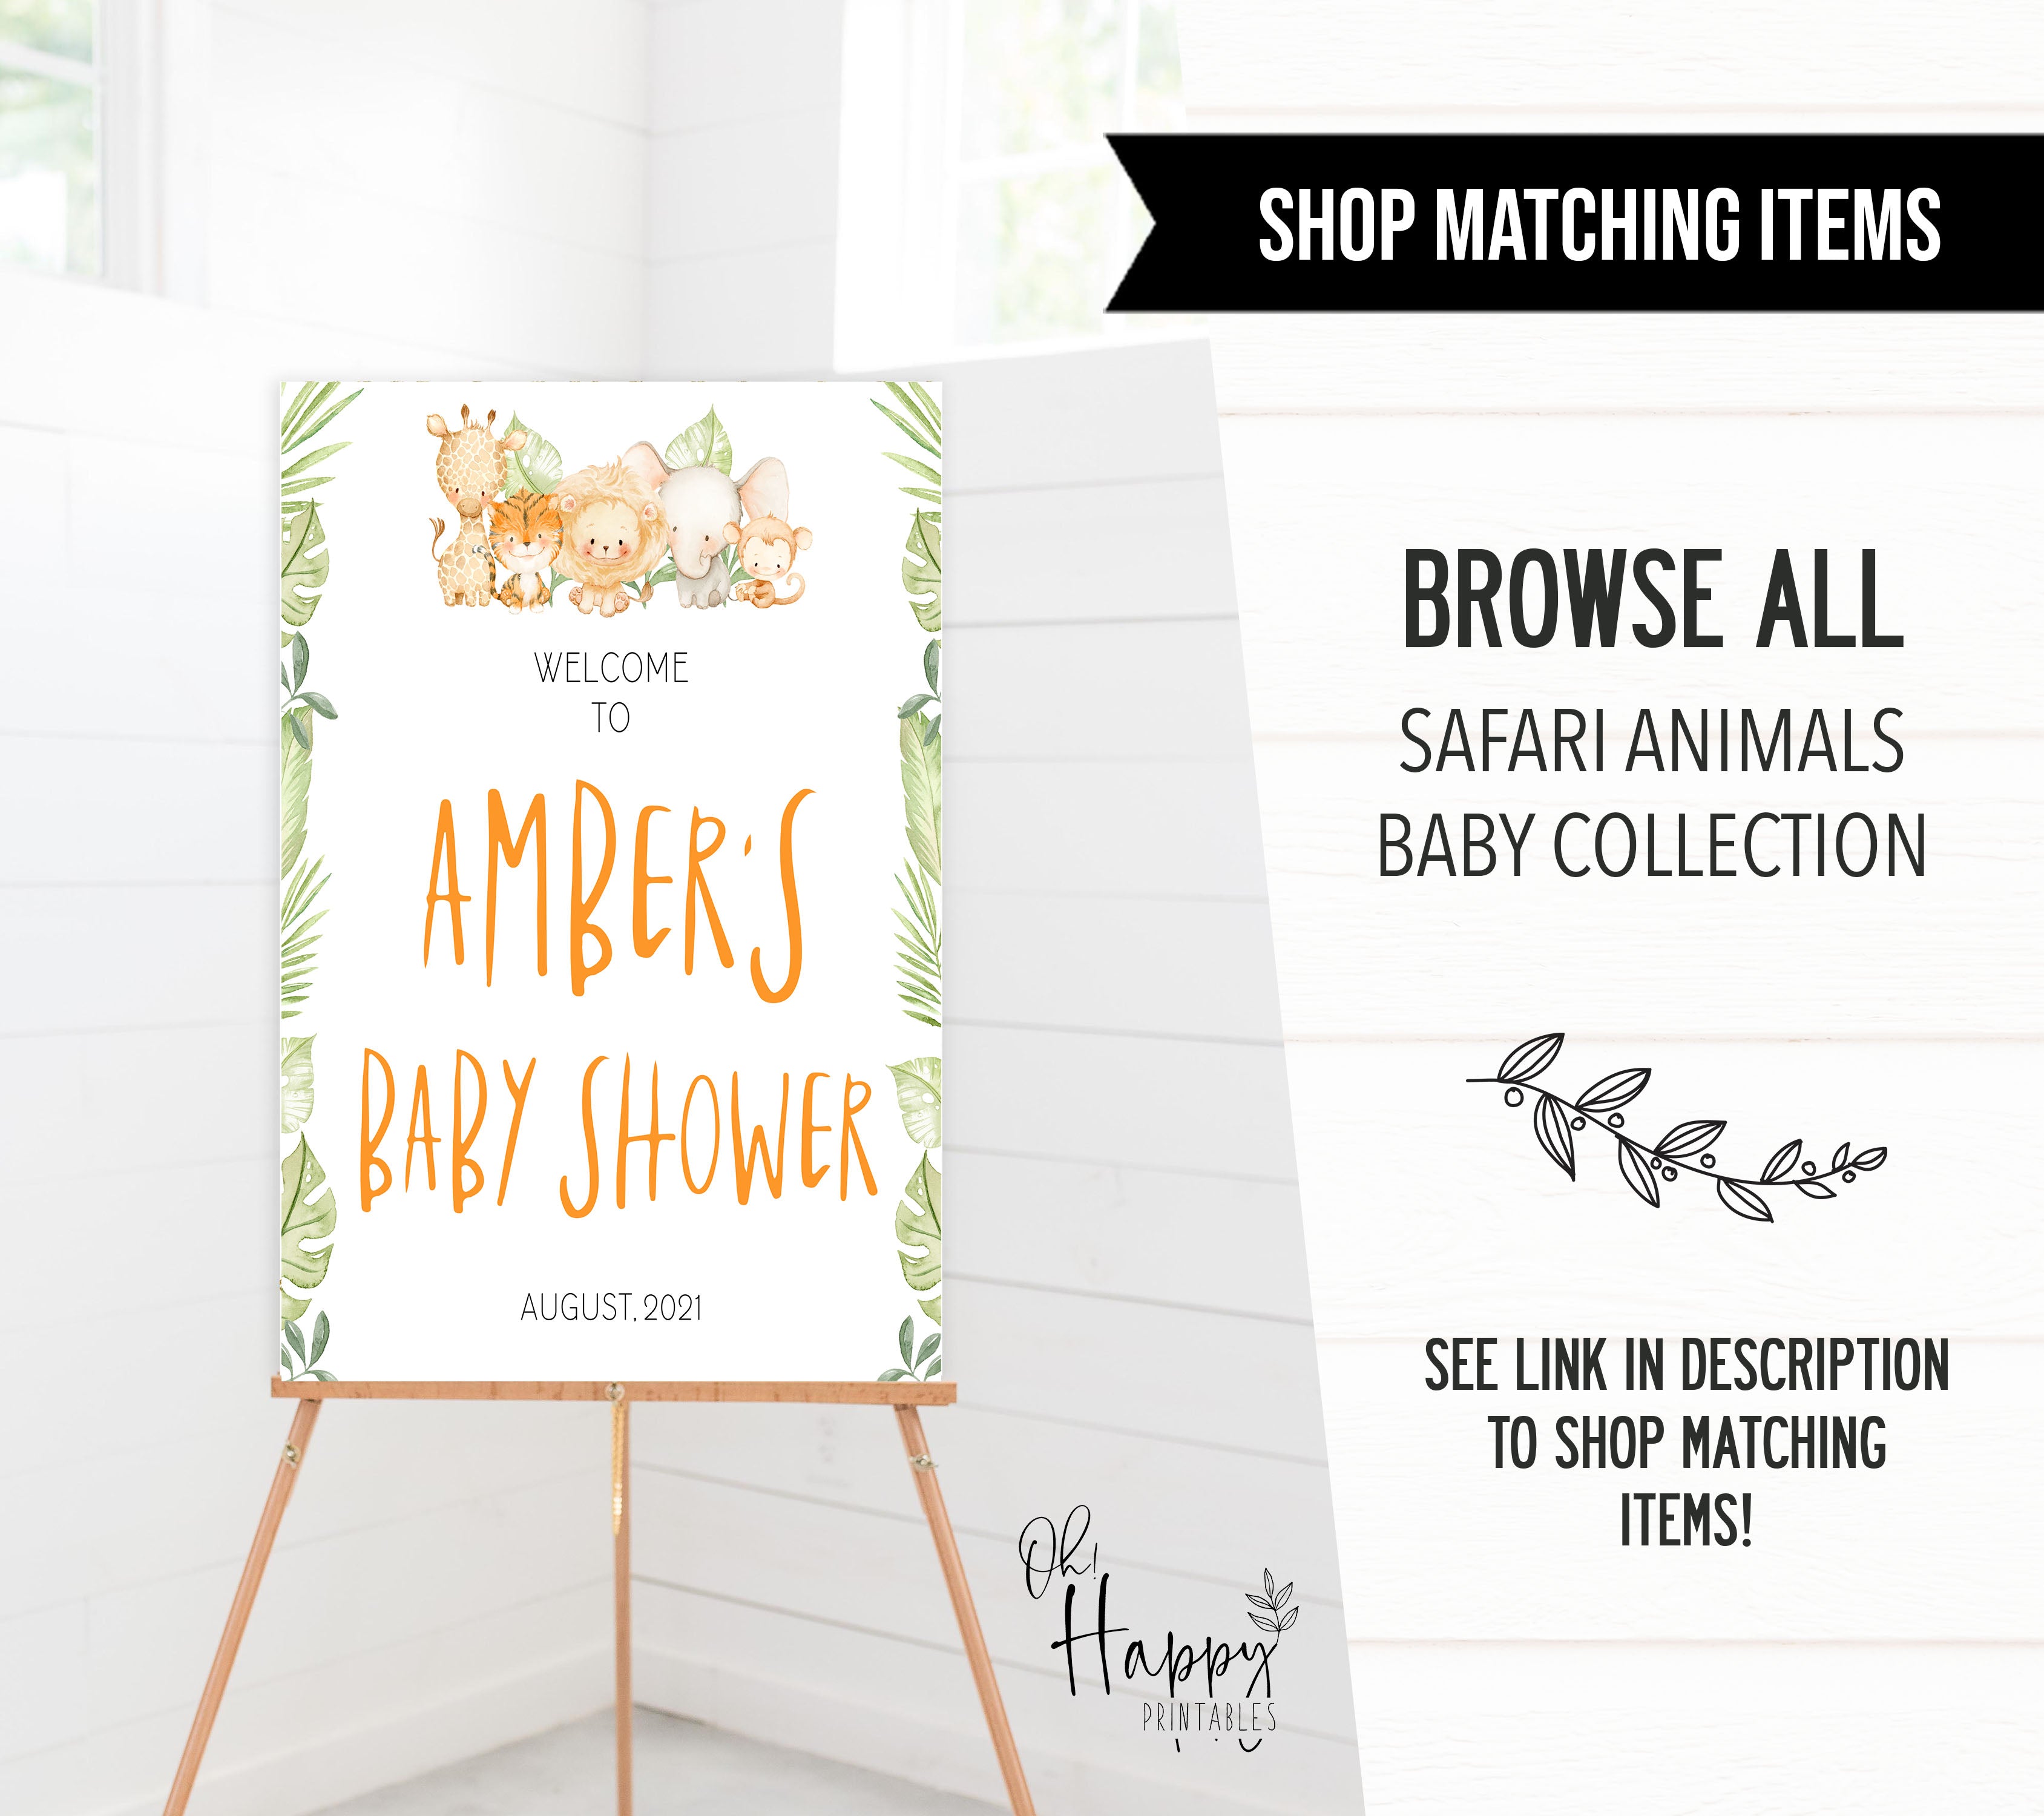 baby bump or beer belly game, Printable baby shower games, safari animals baby games, baby shower games, fun baby shower ideas, top baby shower ideas, safari animals baby shower, baby shower games, fun baby shower ideas